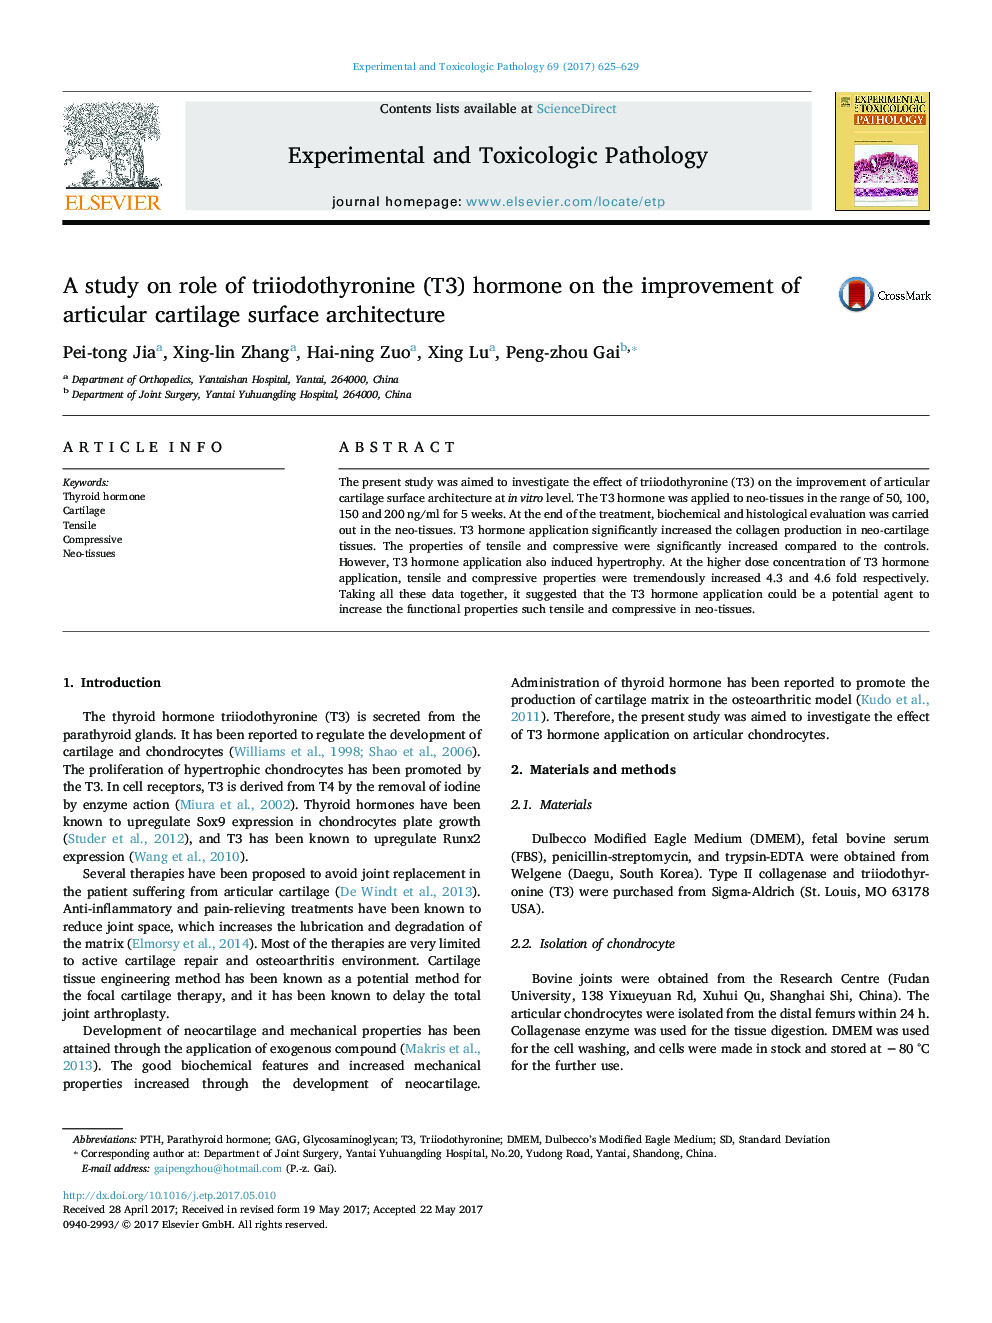 A study on role of triiodothyronine (T3) hormone on the improvement of articular cartilage surface architecture